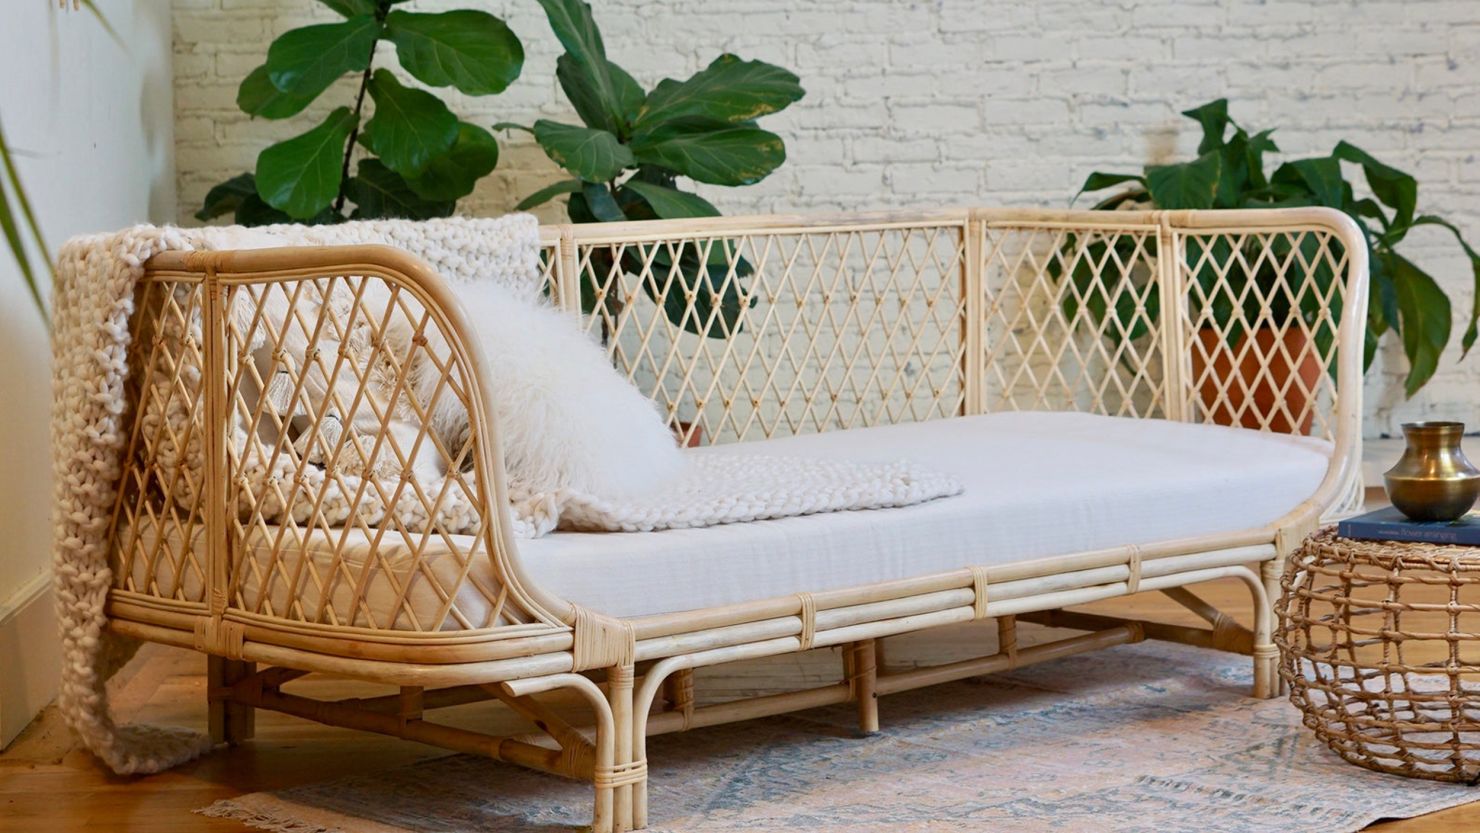 Weather-Resistant Woven Rattan Material For Outdoor Use 